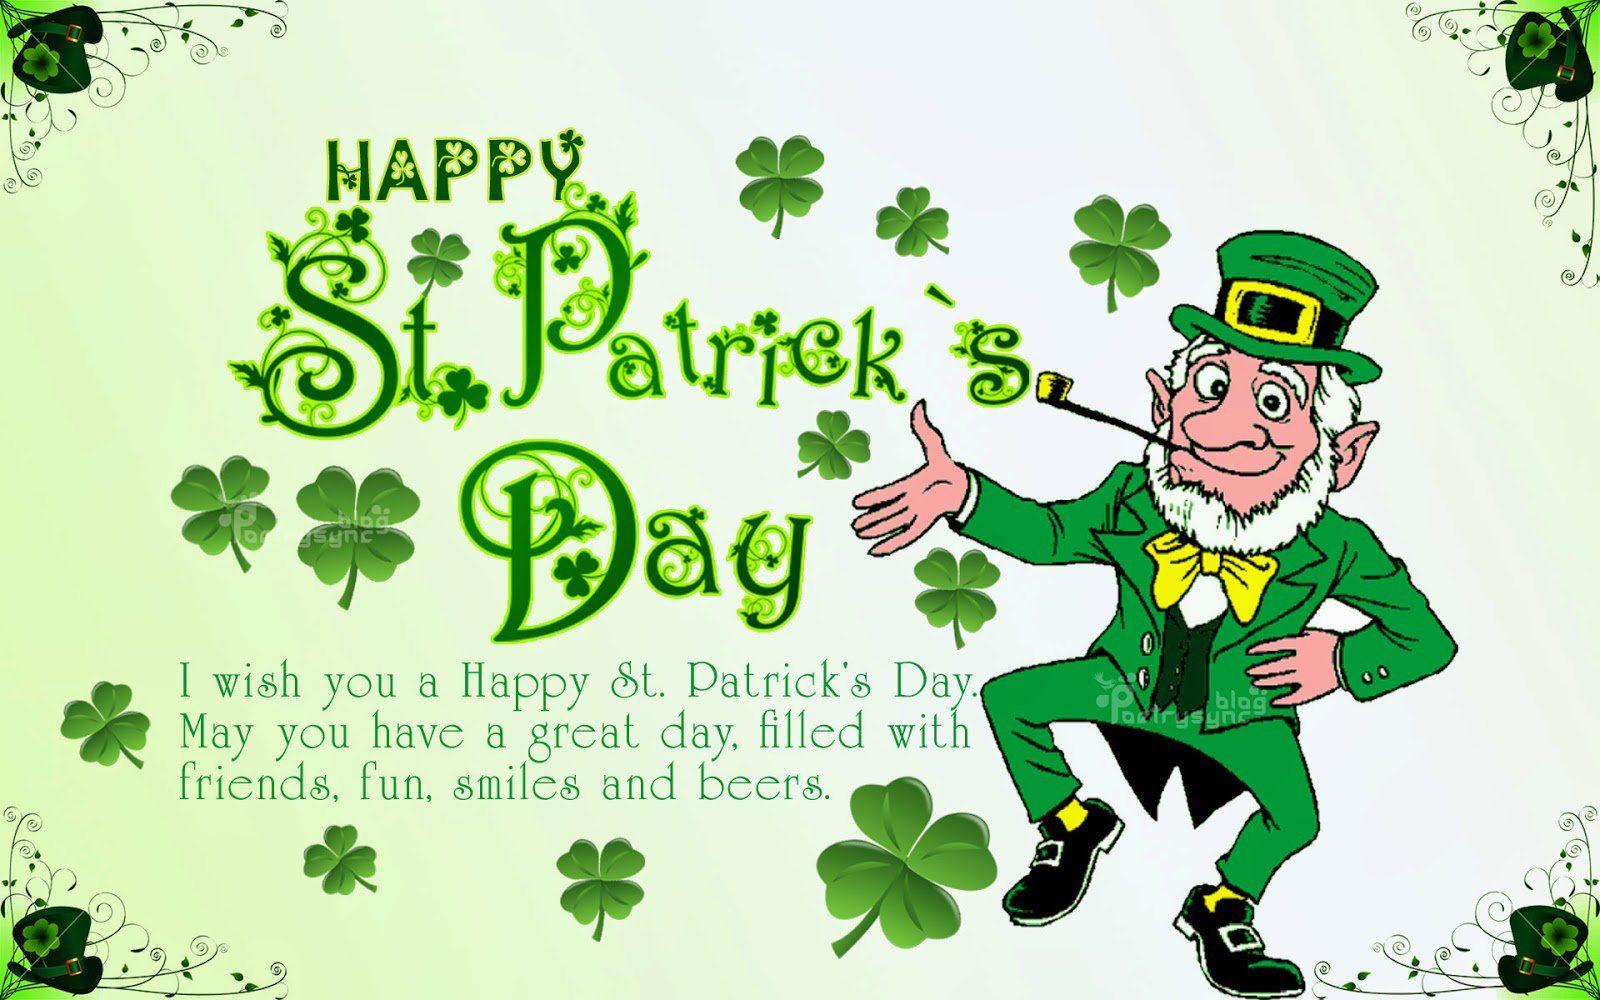 St Patrick's Day 2018 Image Wallpaper Greetings Cards Quotes SMS